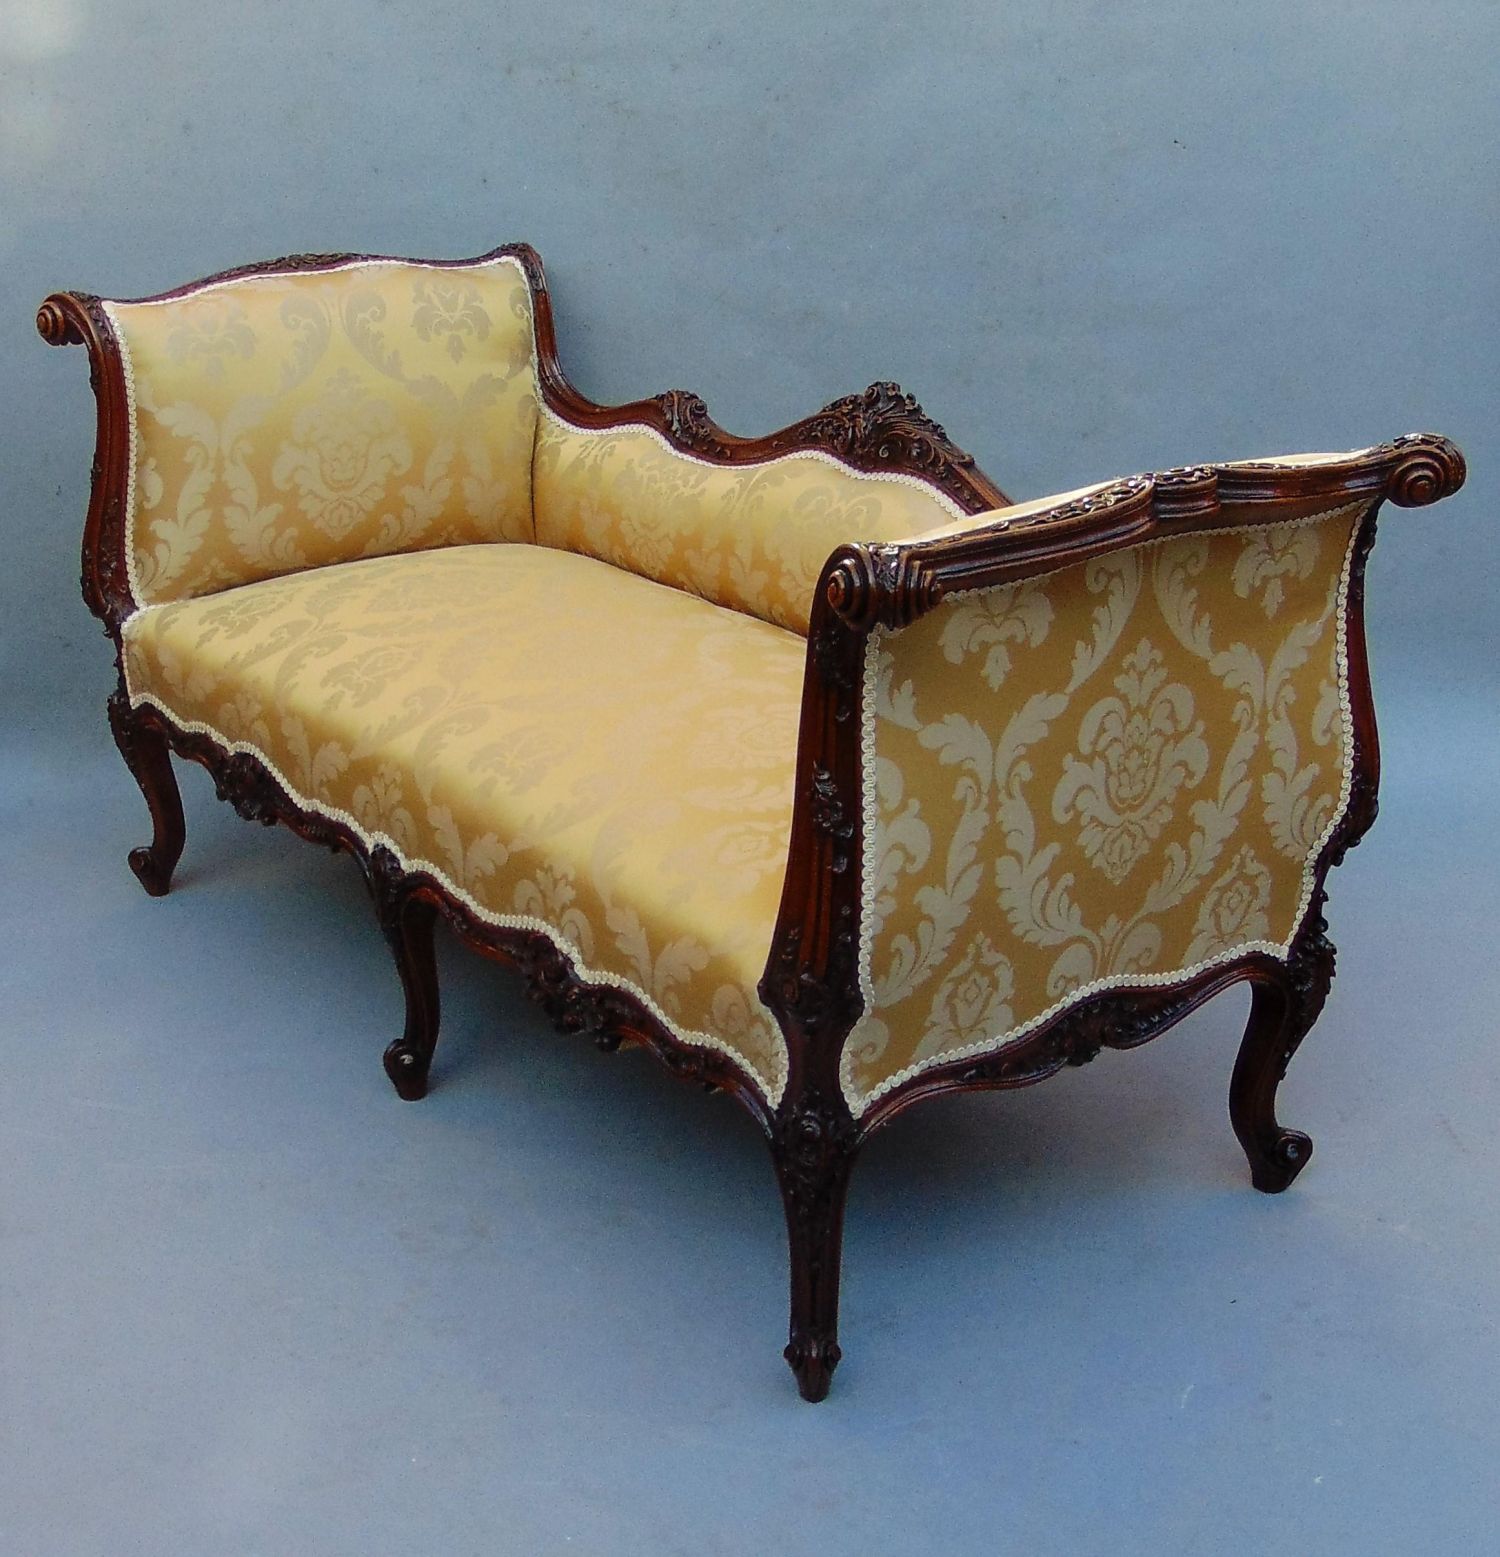 A Most Exquisite Victorian Walnut Settee Antique Sofas Hemswell Centres